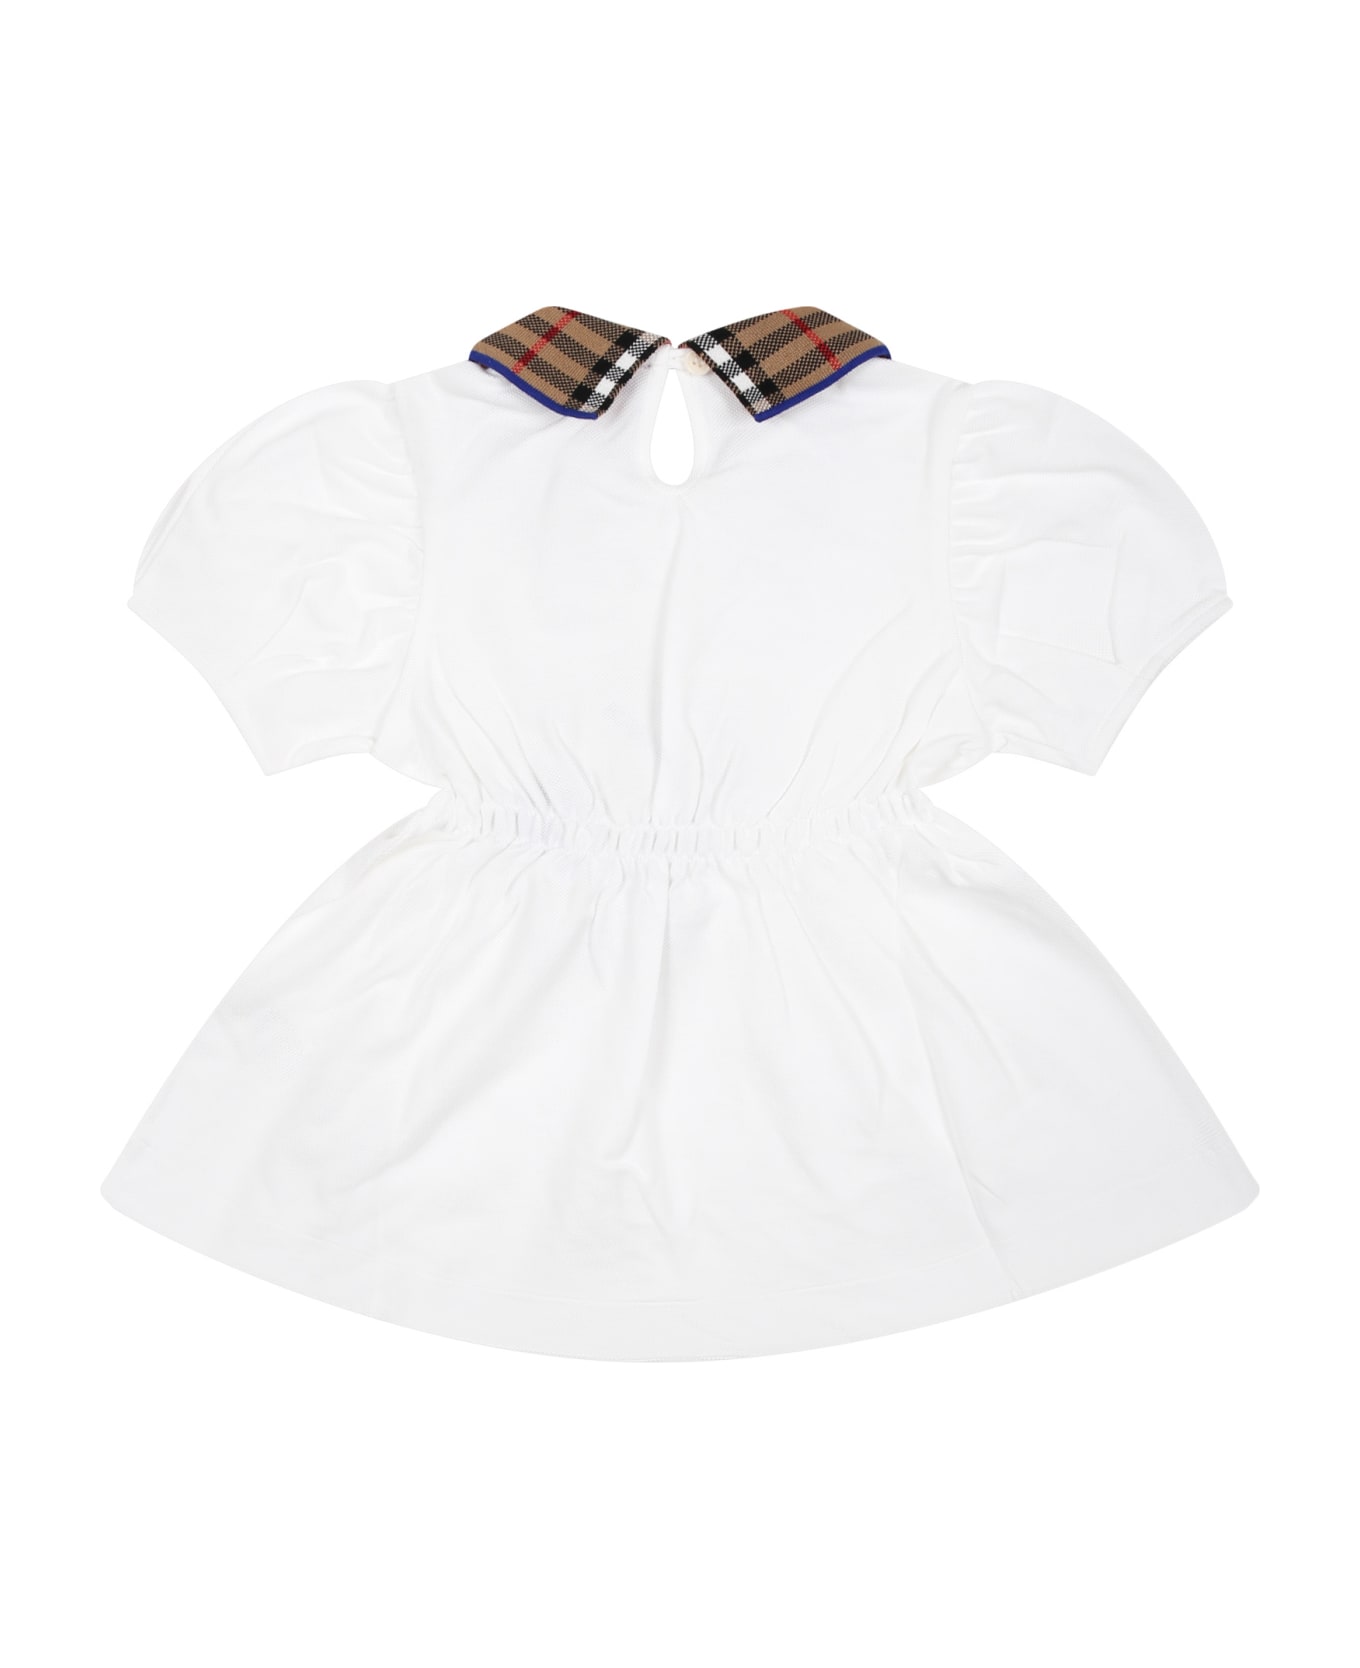 Burberry lola White Dress For Baby Girl With Vintage Check On The Collar - White